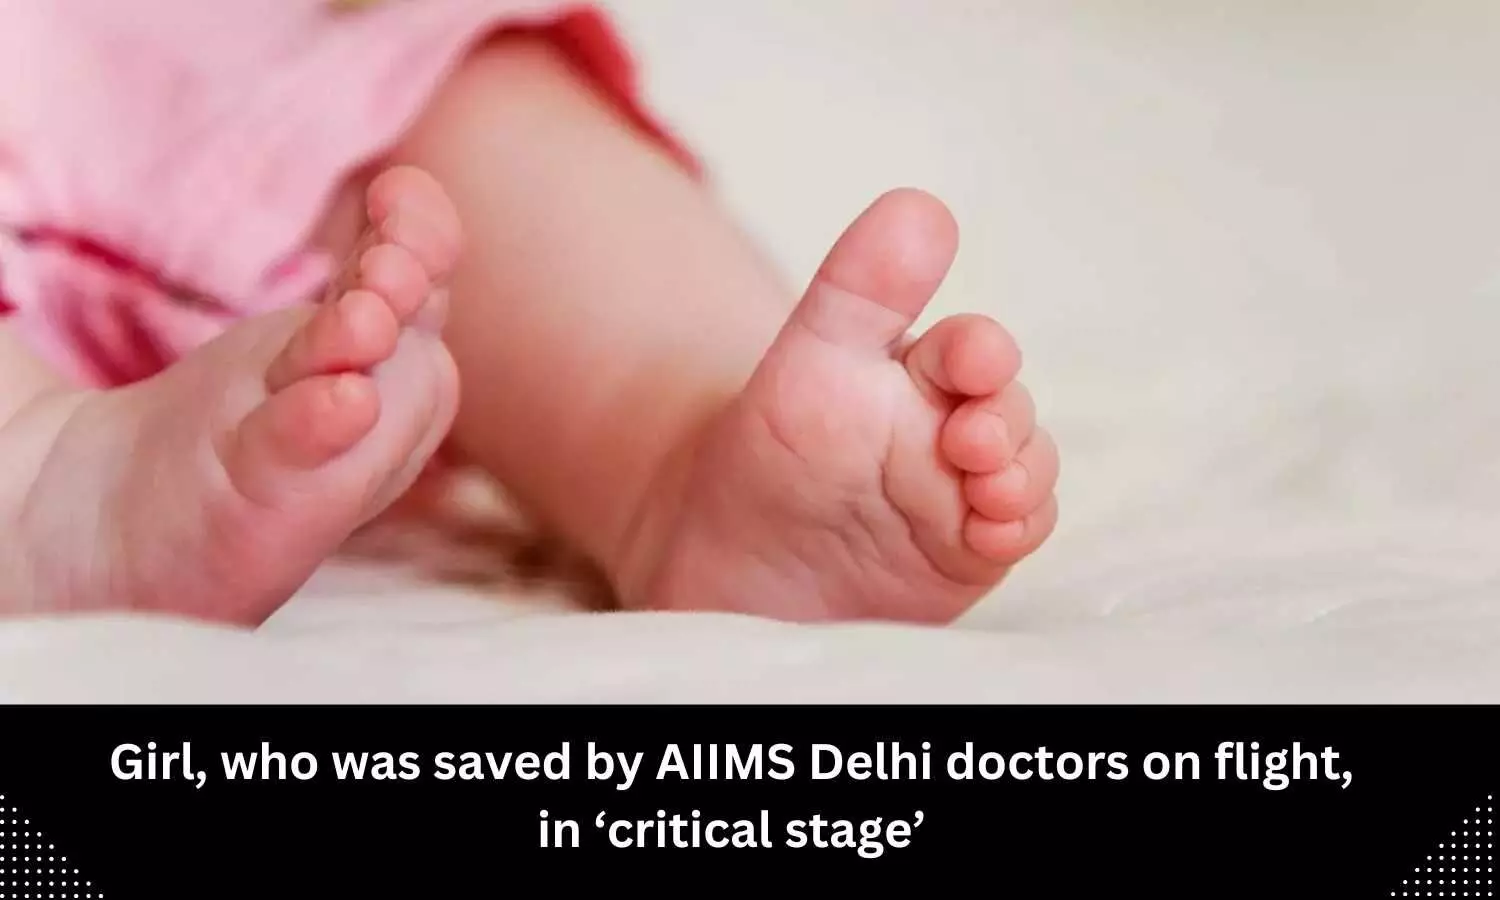 Girl who was saved by AIIMS Delhi doctors on flight in ‘critical stage’